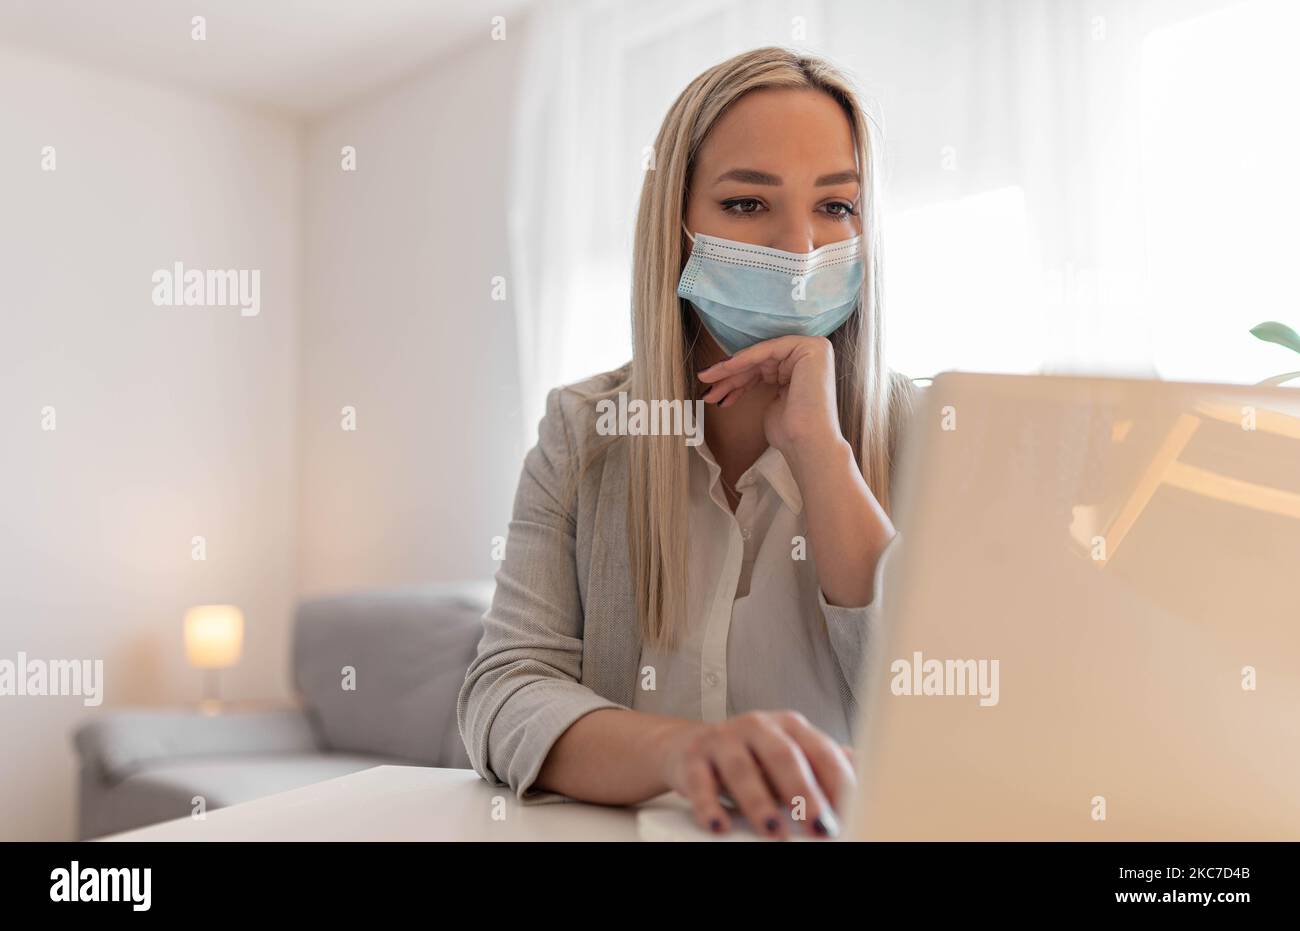 Female employee wearing medical face mask while working in the business office during covid-19 pandemic. Businesswoman wearing face mask Stock Photo